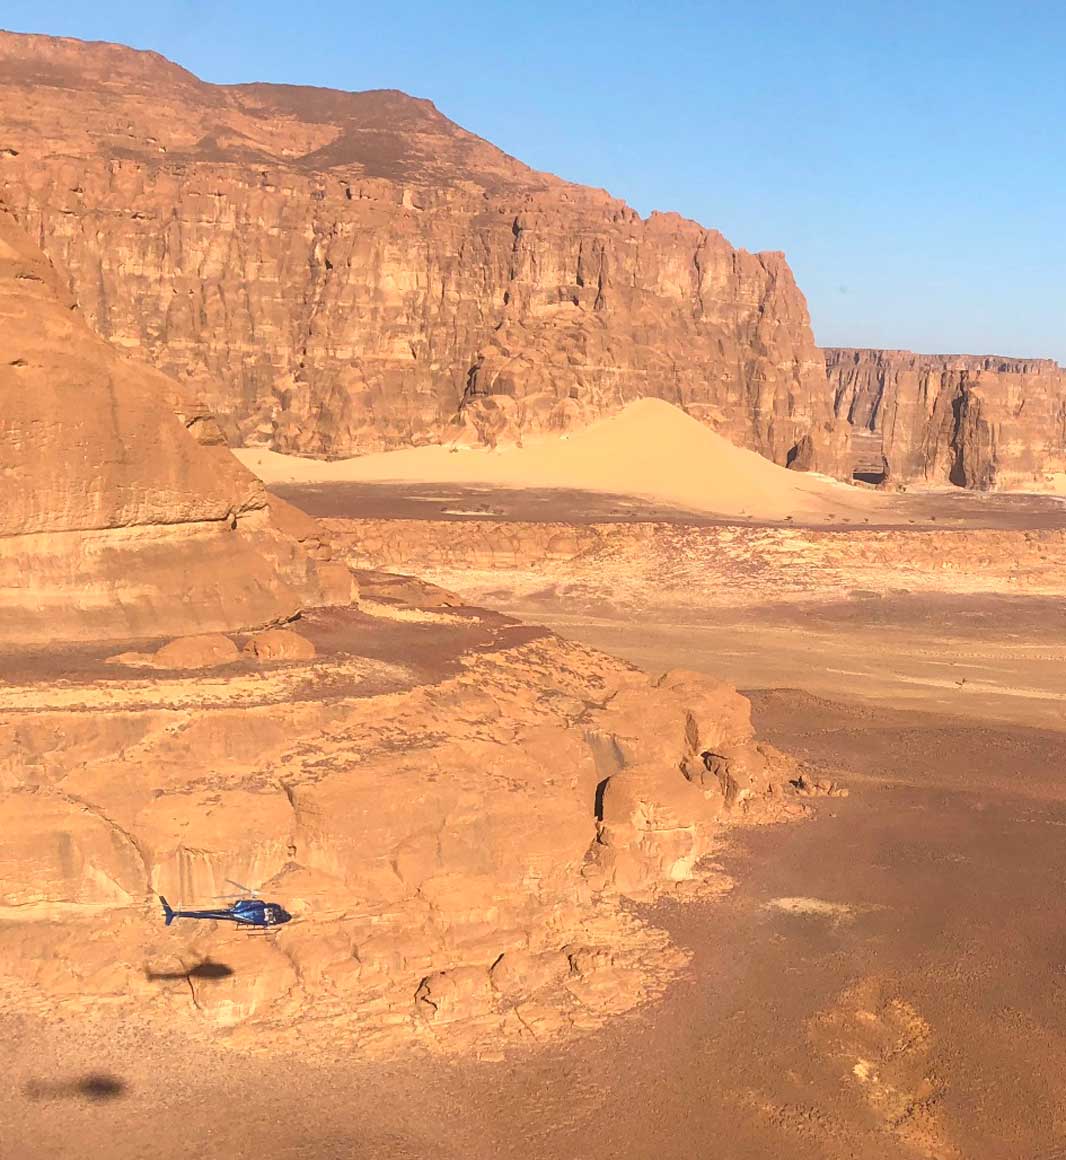 Exploring Ennedi and Tibesti in Chad by helicopter